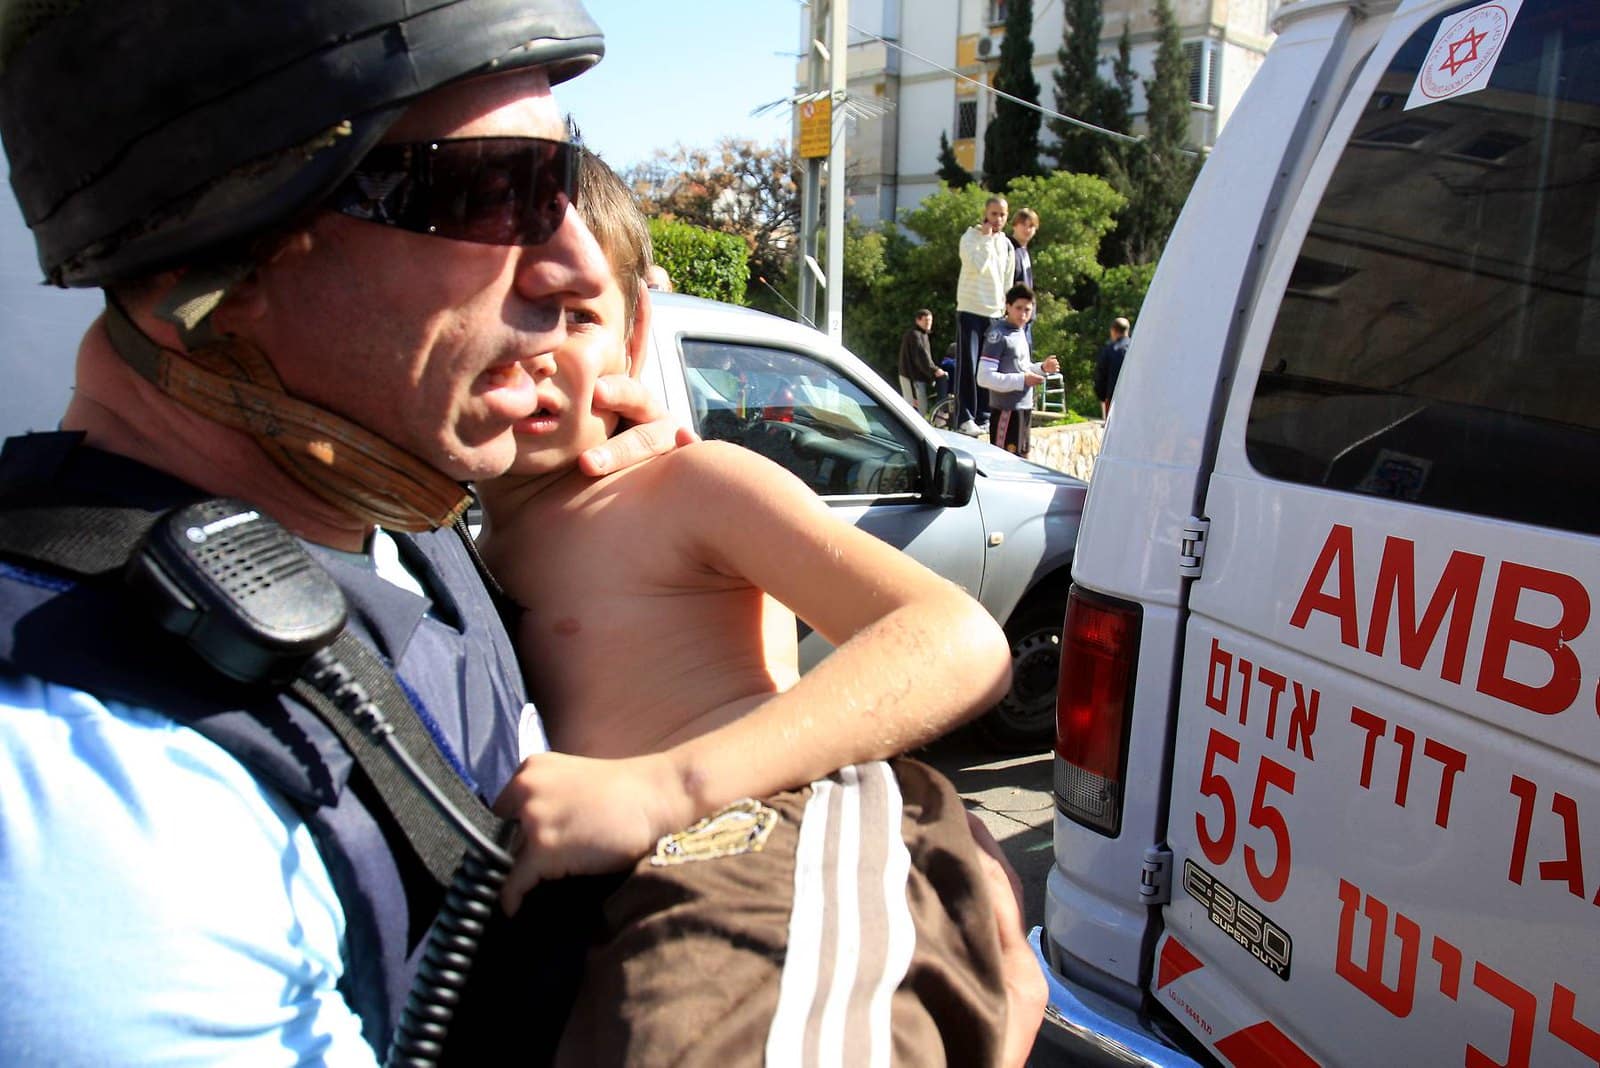 Israel Attack aftermath police officer carrying child